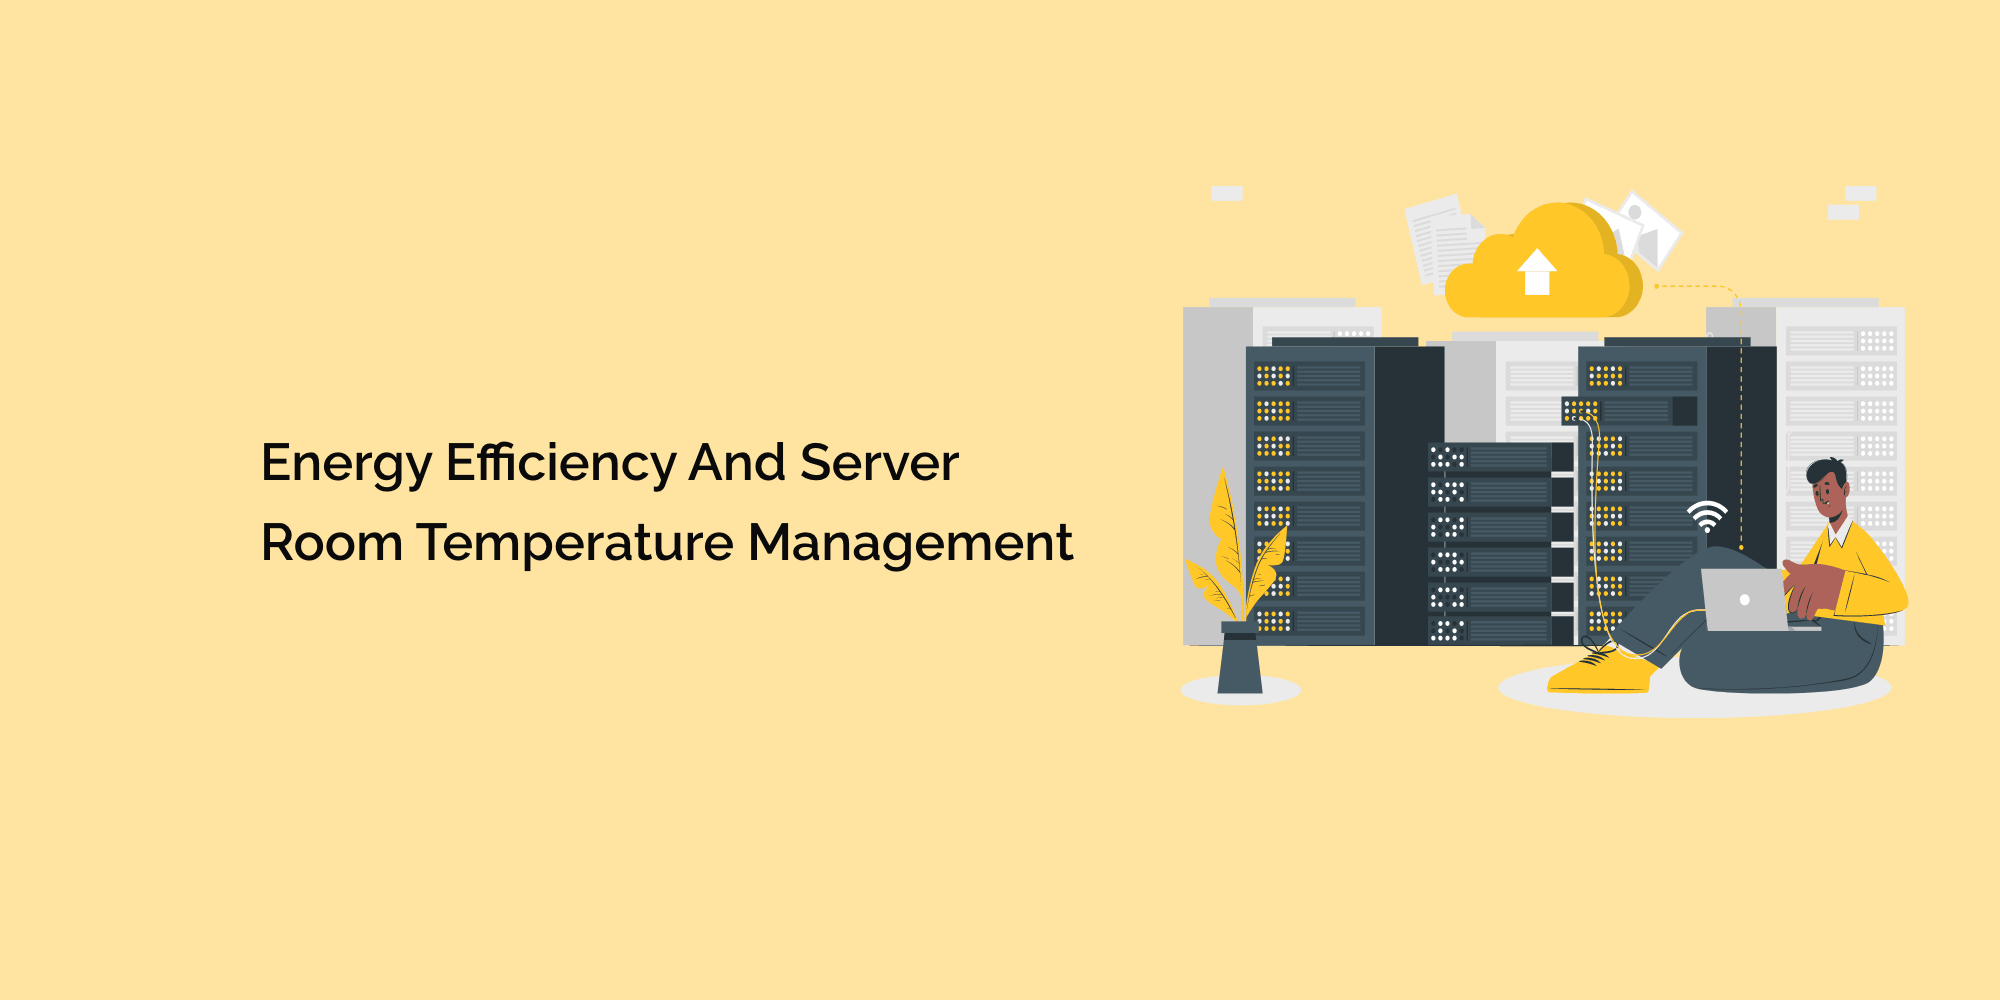 Energy Efficiency and Server Room Temperature Management